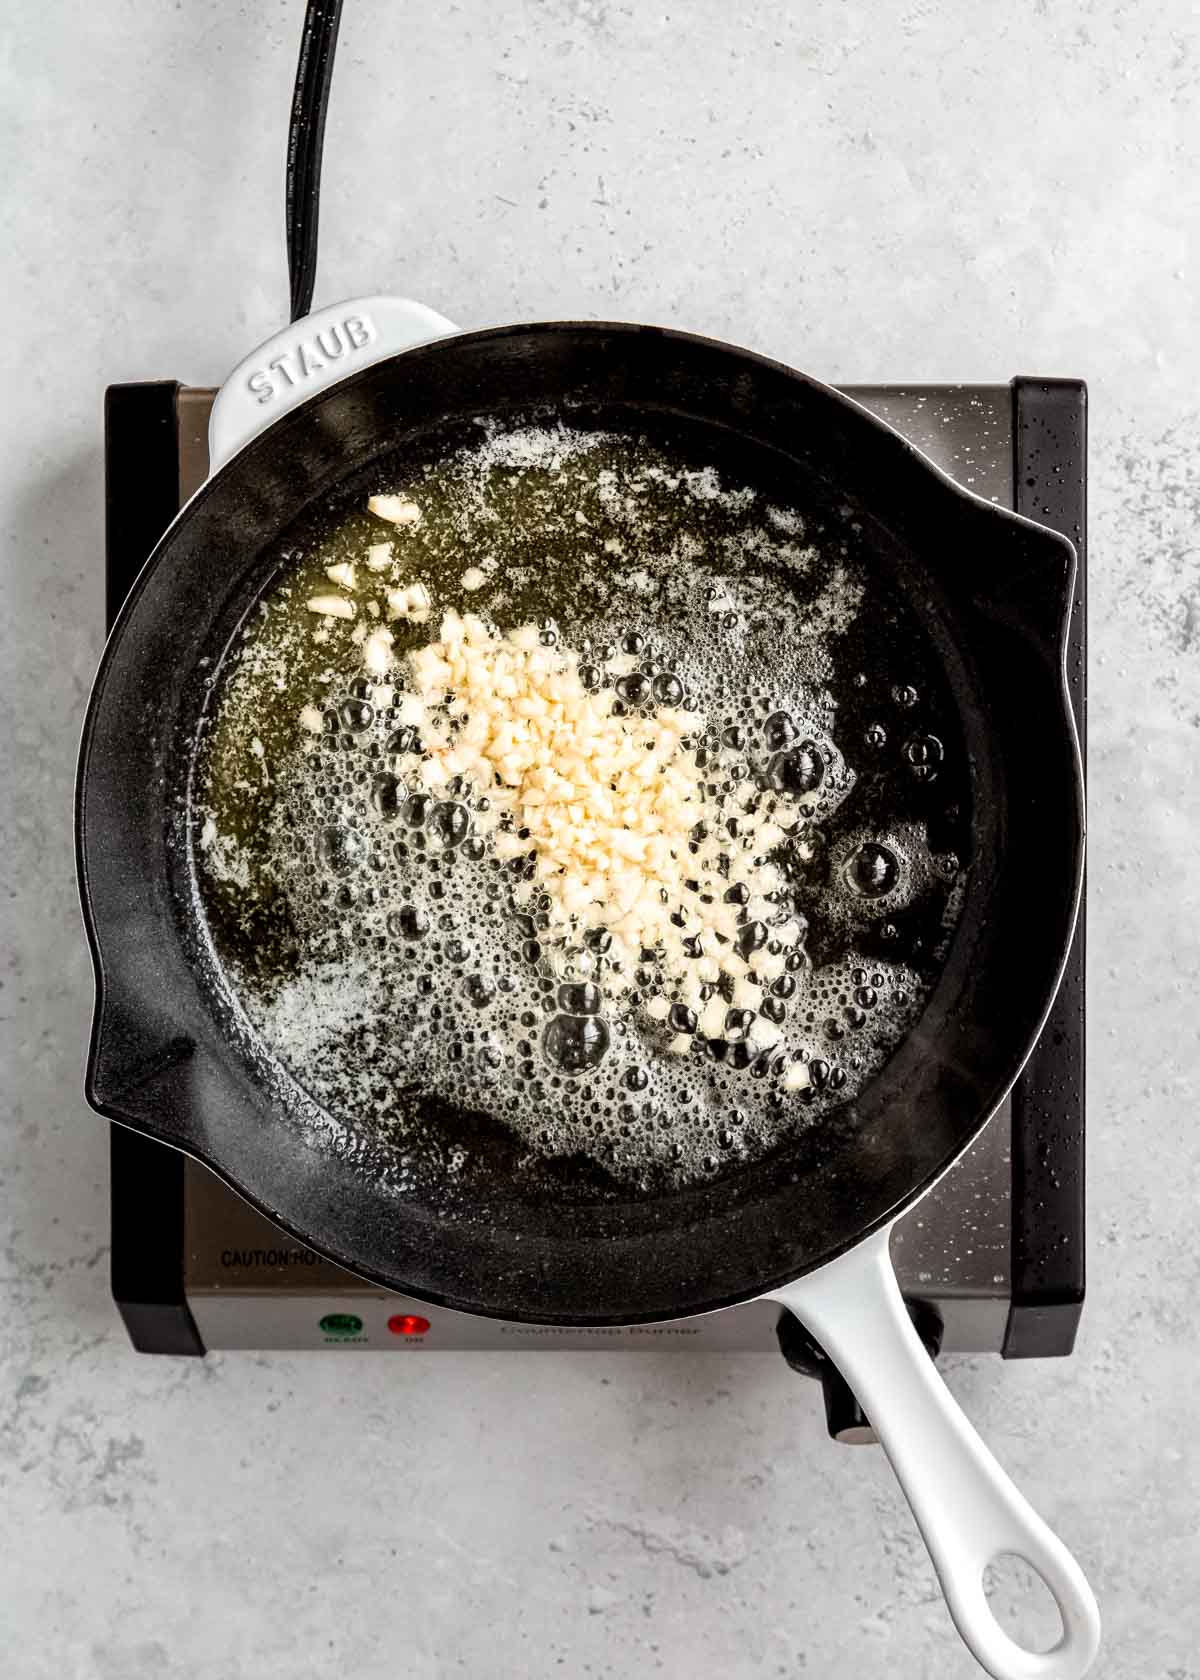 garlic being sauteed in cast iron skillet